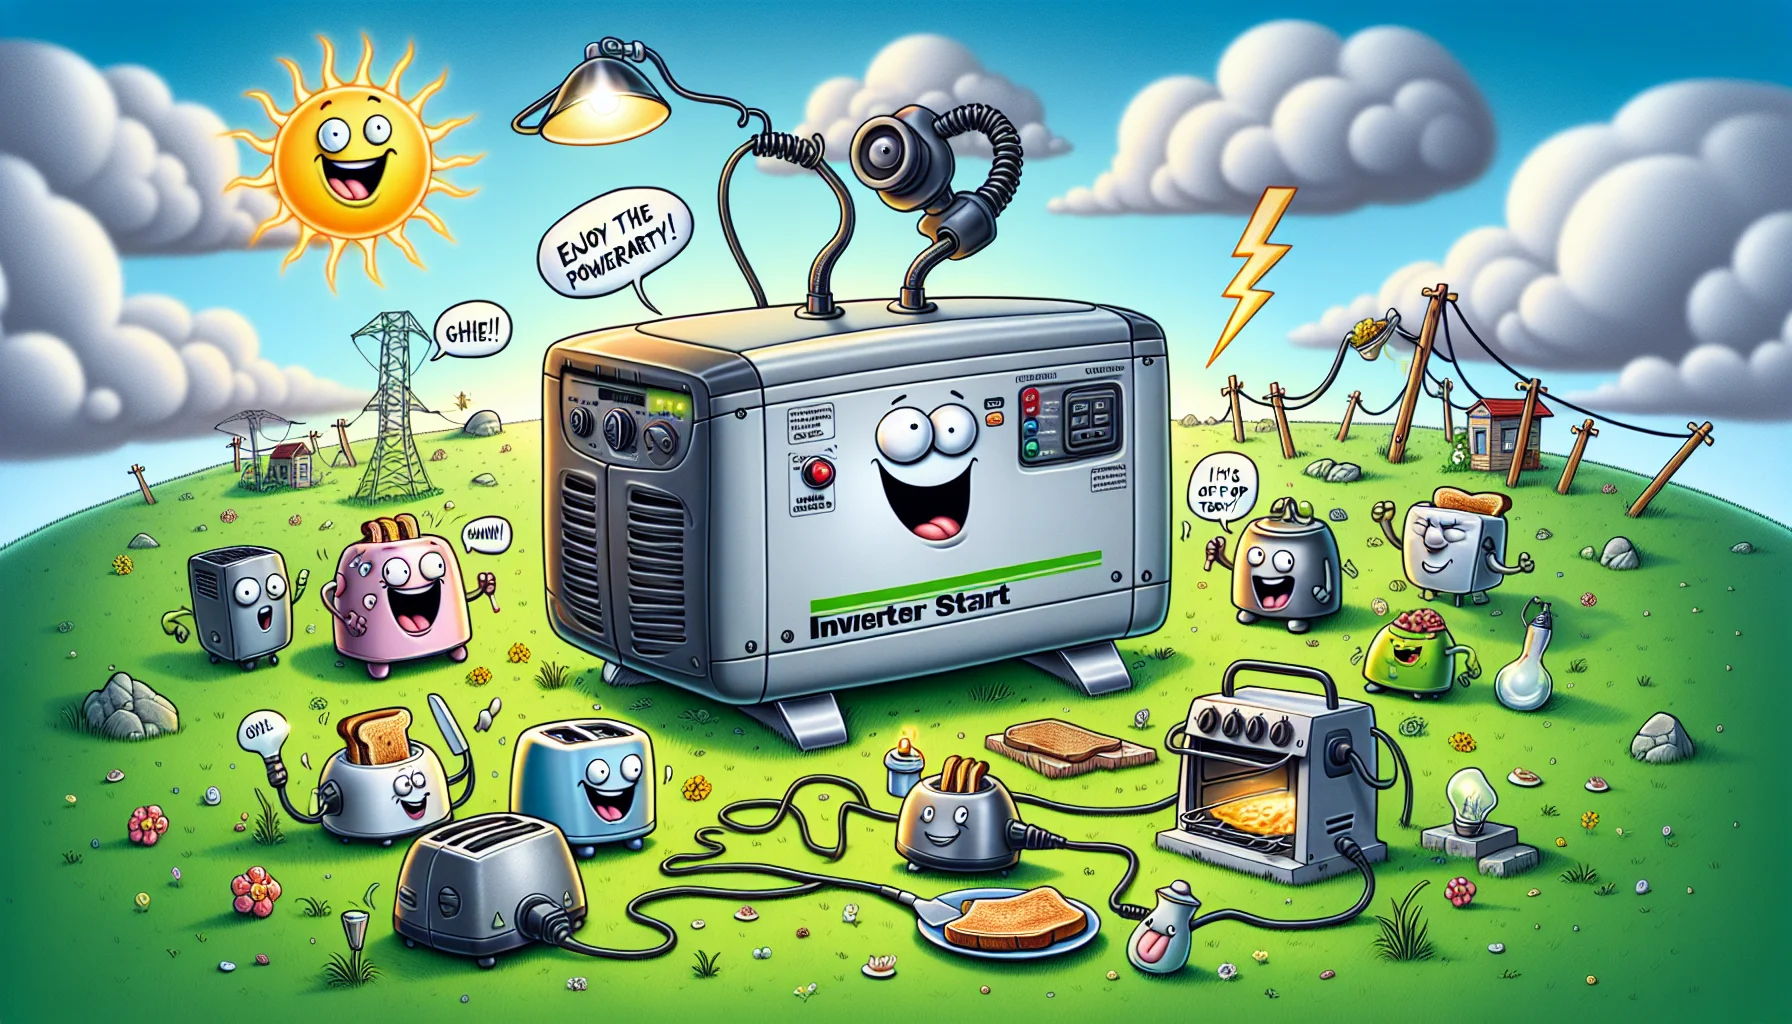 Create a humorous illustration of a remote start inverter generator. The generator is dressed up with a gleeful expression and anthropomorphic arms and legs. It stands on a rolling green hilltop surrounded by expressive electrical appliances running on its power. A toaster is making toast, a lamp illuminating the scene with bright light, and a small electric stove cooking up a feast, all in broad daylight, laughing and cheering. In the distance, the sun is chuckling with a speech bubble saying, 'Enjoy the power party, I'm off duty today!' This peculiar scenario inspires a light-hearted perspective on generating electricity.